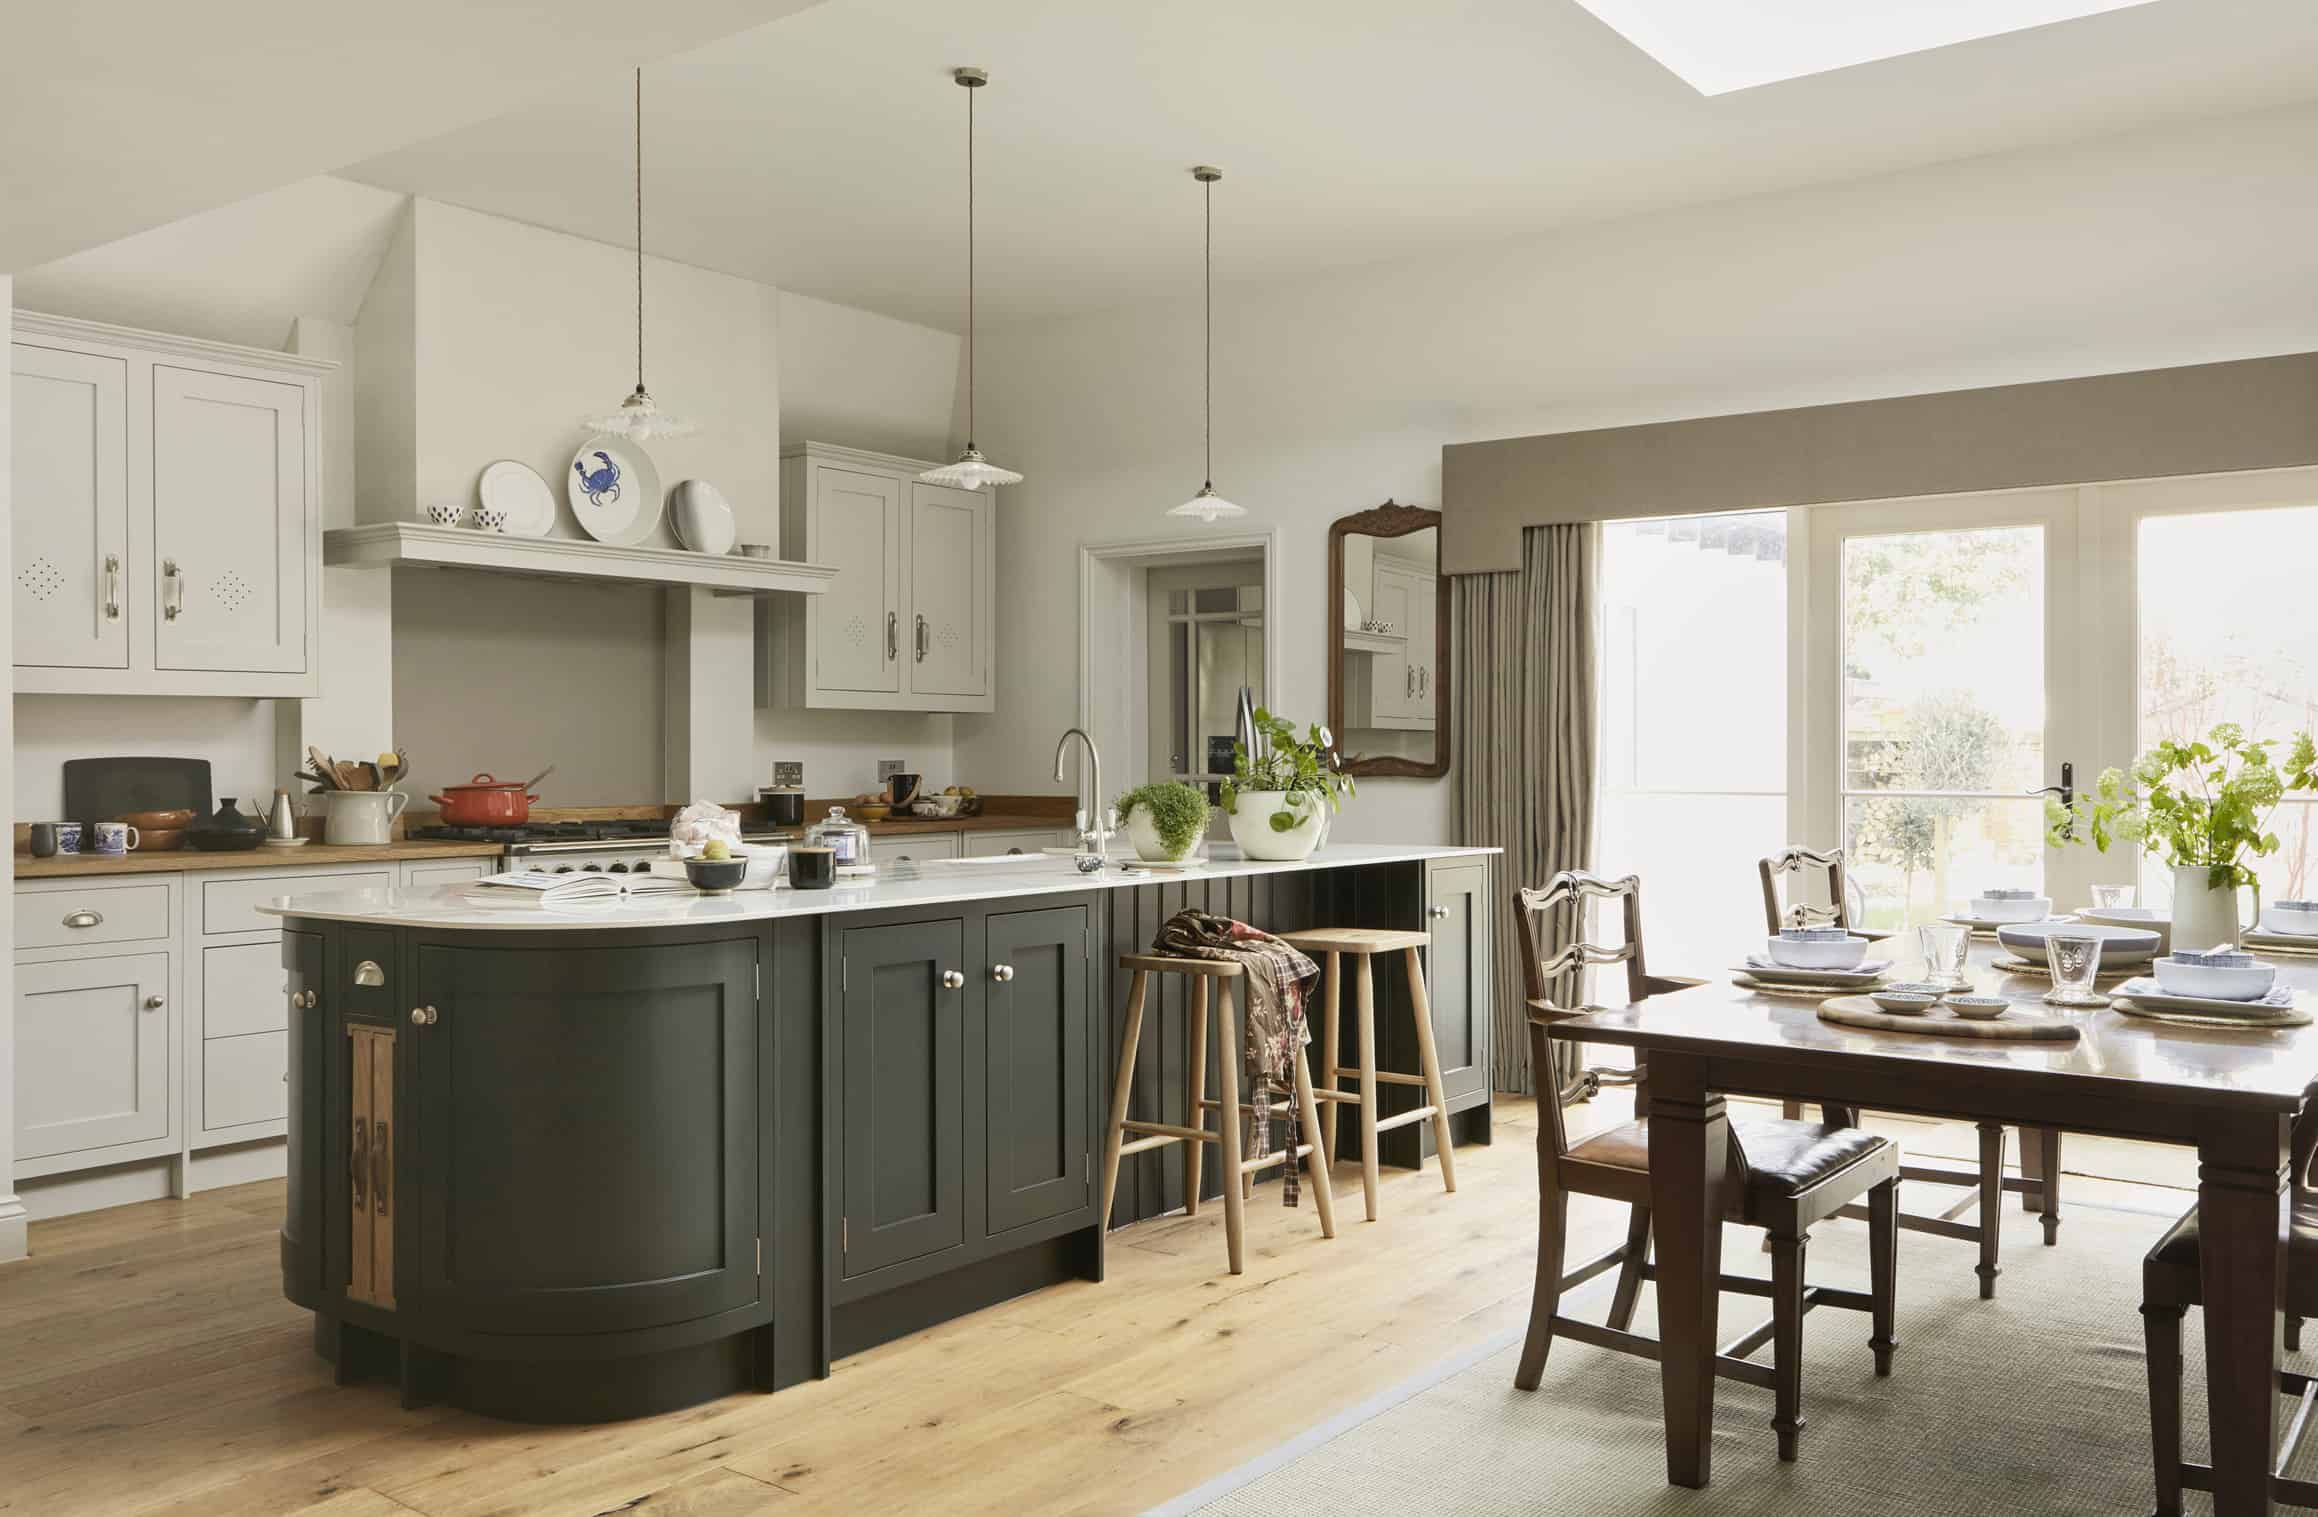 Rustic traditional kitchen island John Lewis of Hungerford